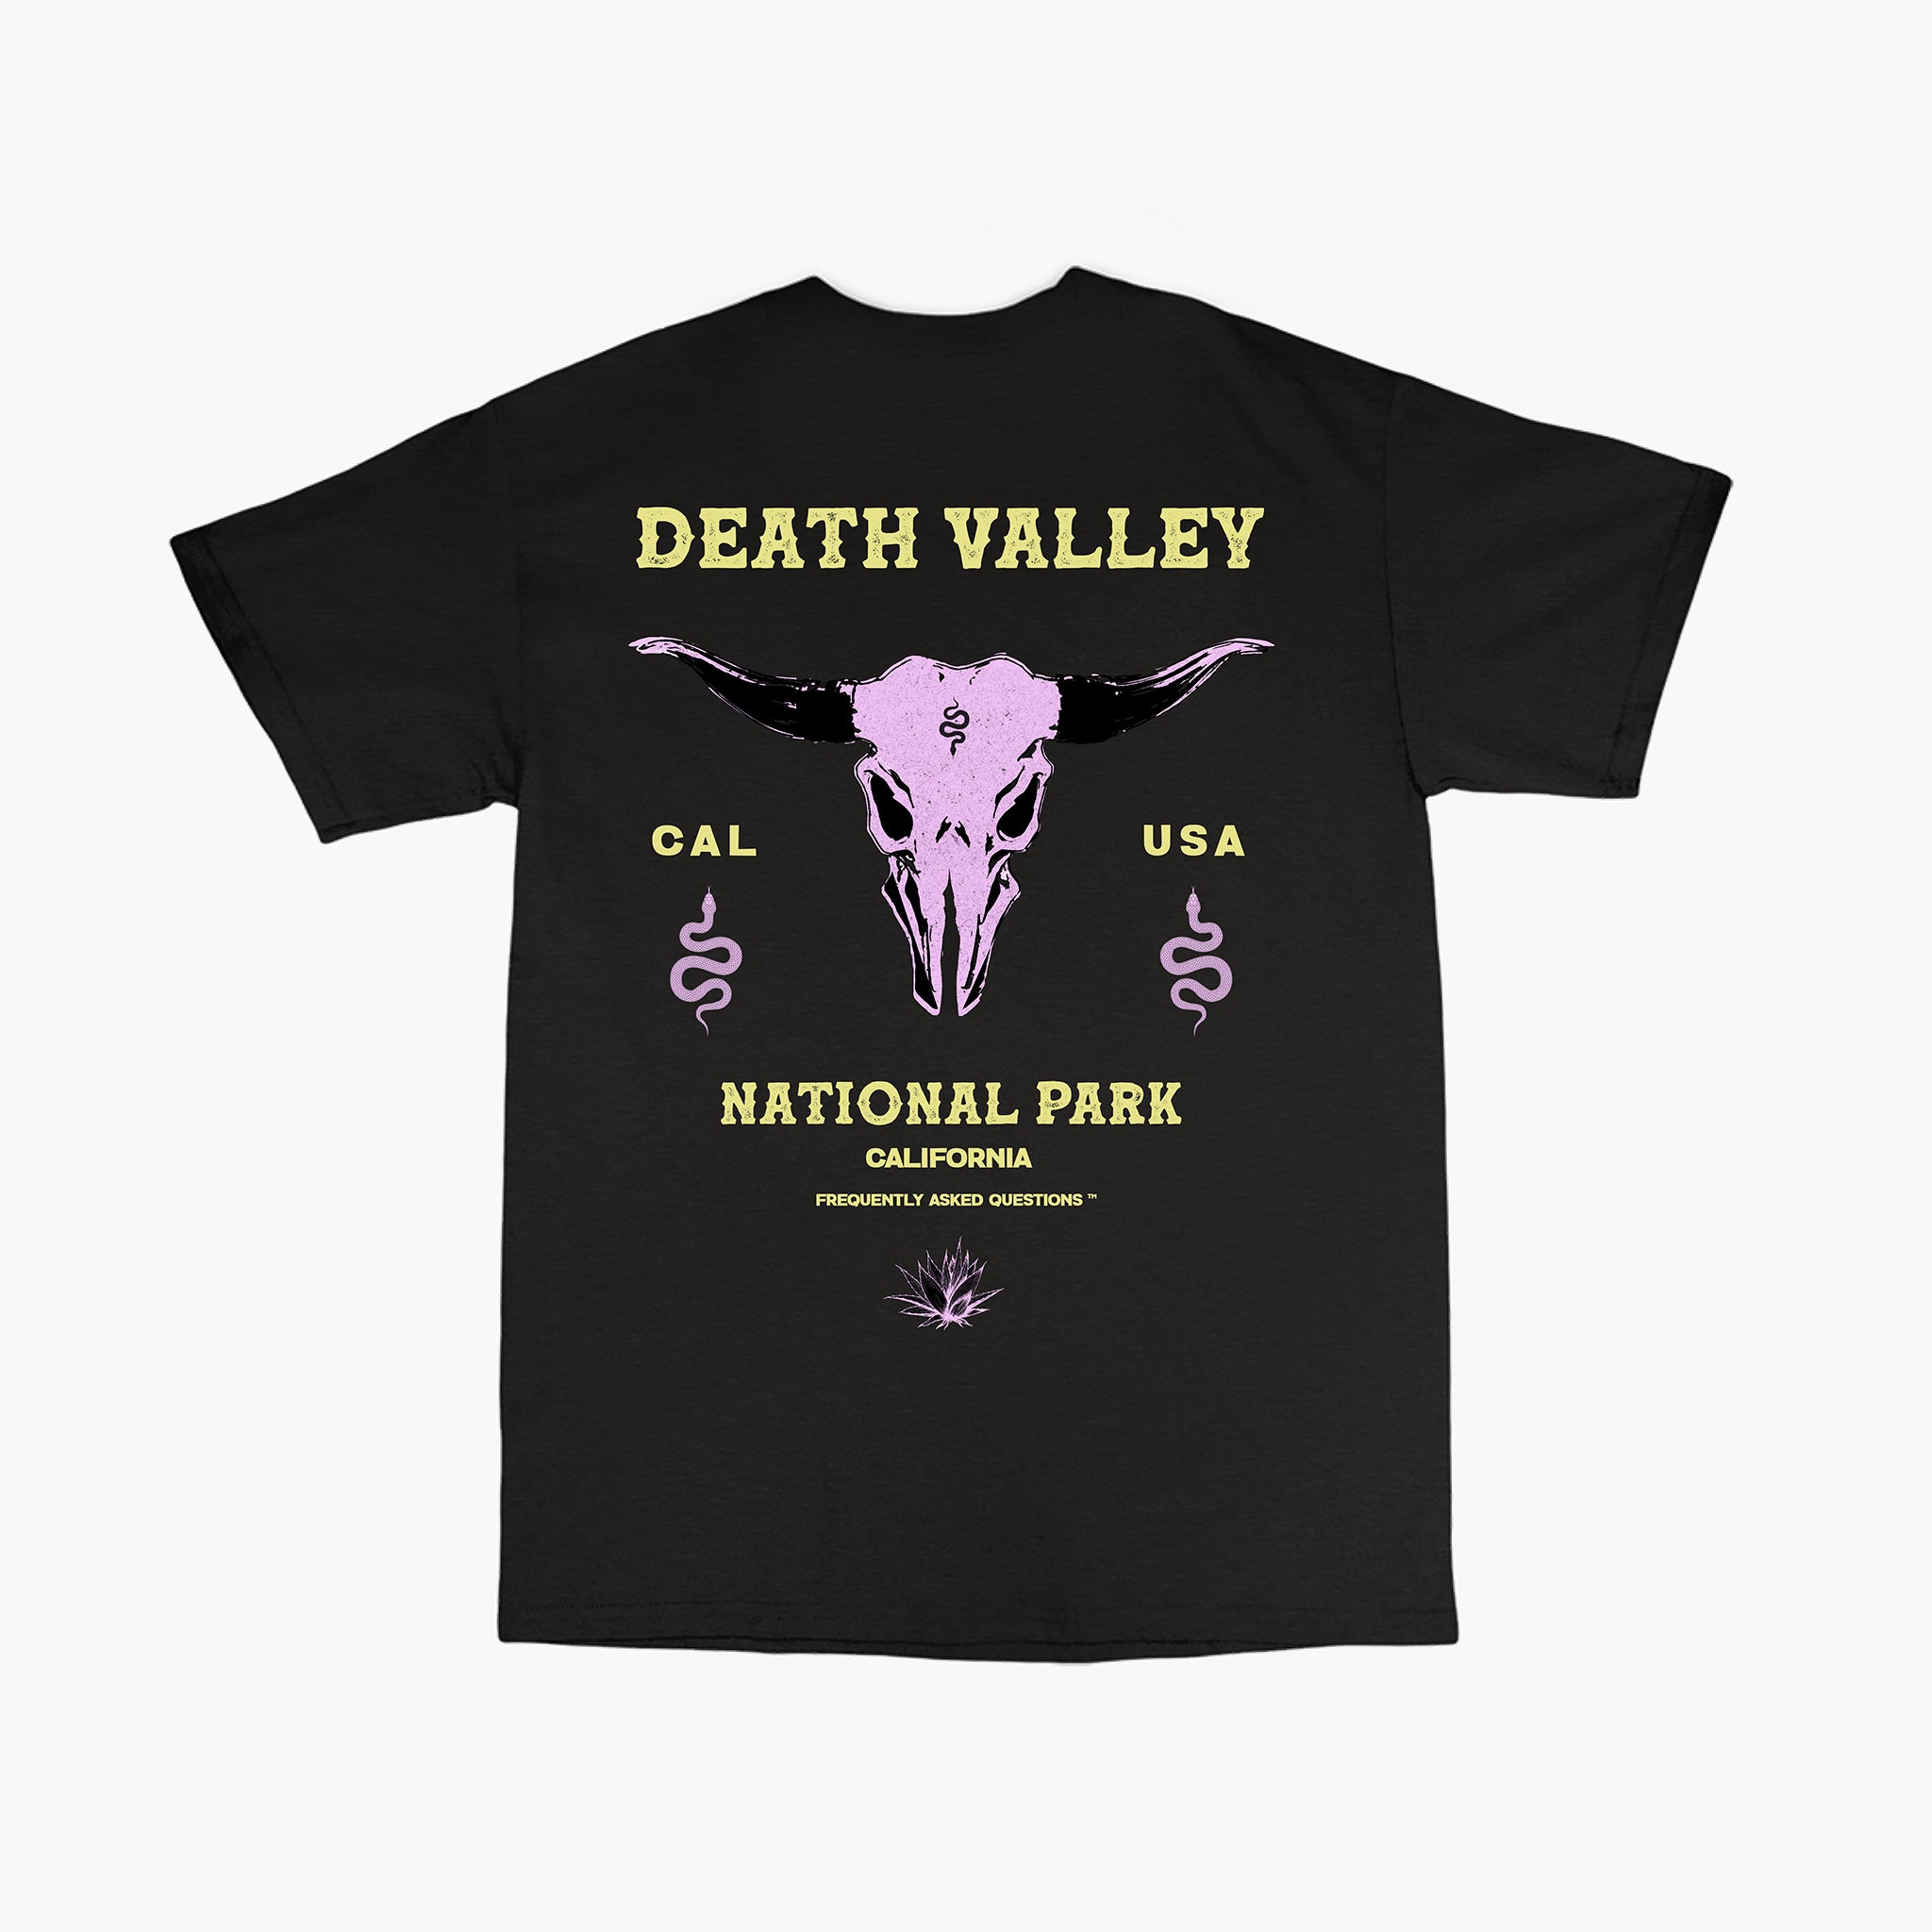 Death Valley T-Shirt - Frequently Asked Questions